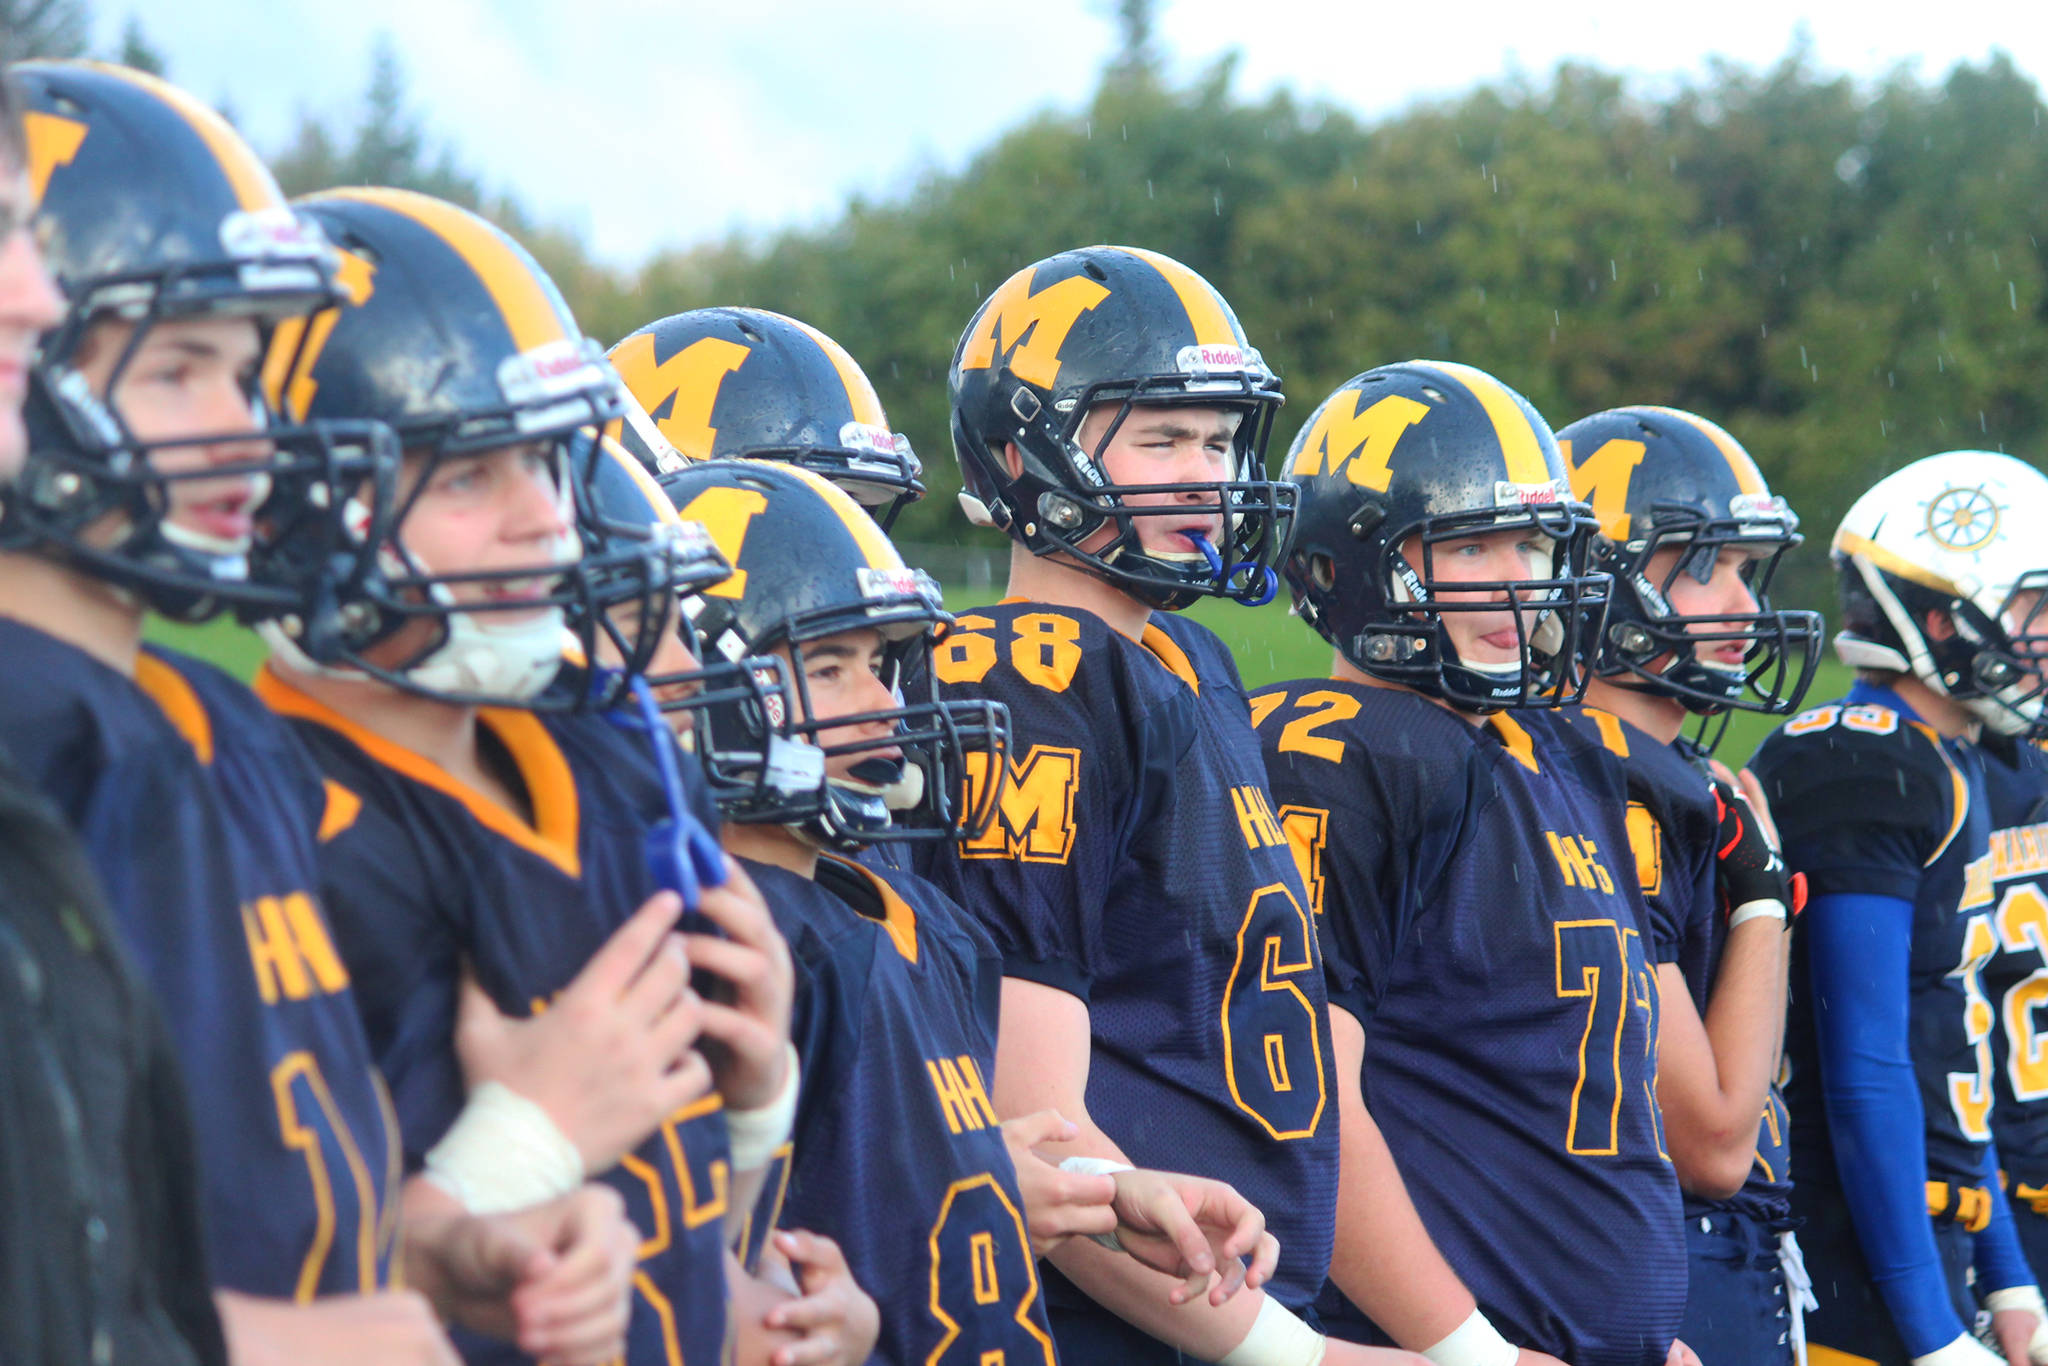 Members of the Homer Mariners varsity football team watch the start of their game against the Head of the Bay Cougars on Friday, Sept. 29, 2017 from the sidelines of the Mariner field in Homer, Alaska, The Mariners prevailed 53-0. (Photo by Megan Pacer/Homer News)